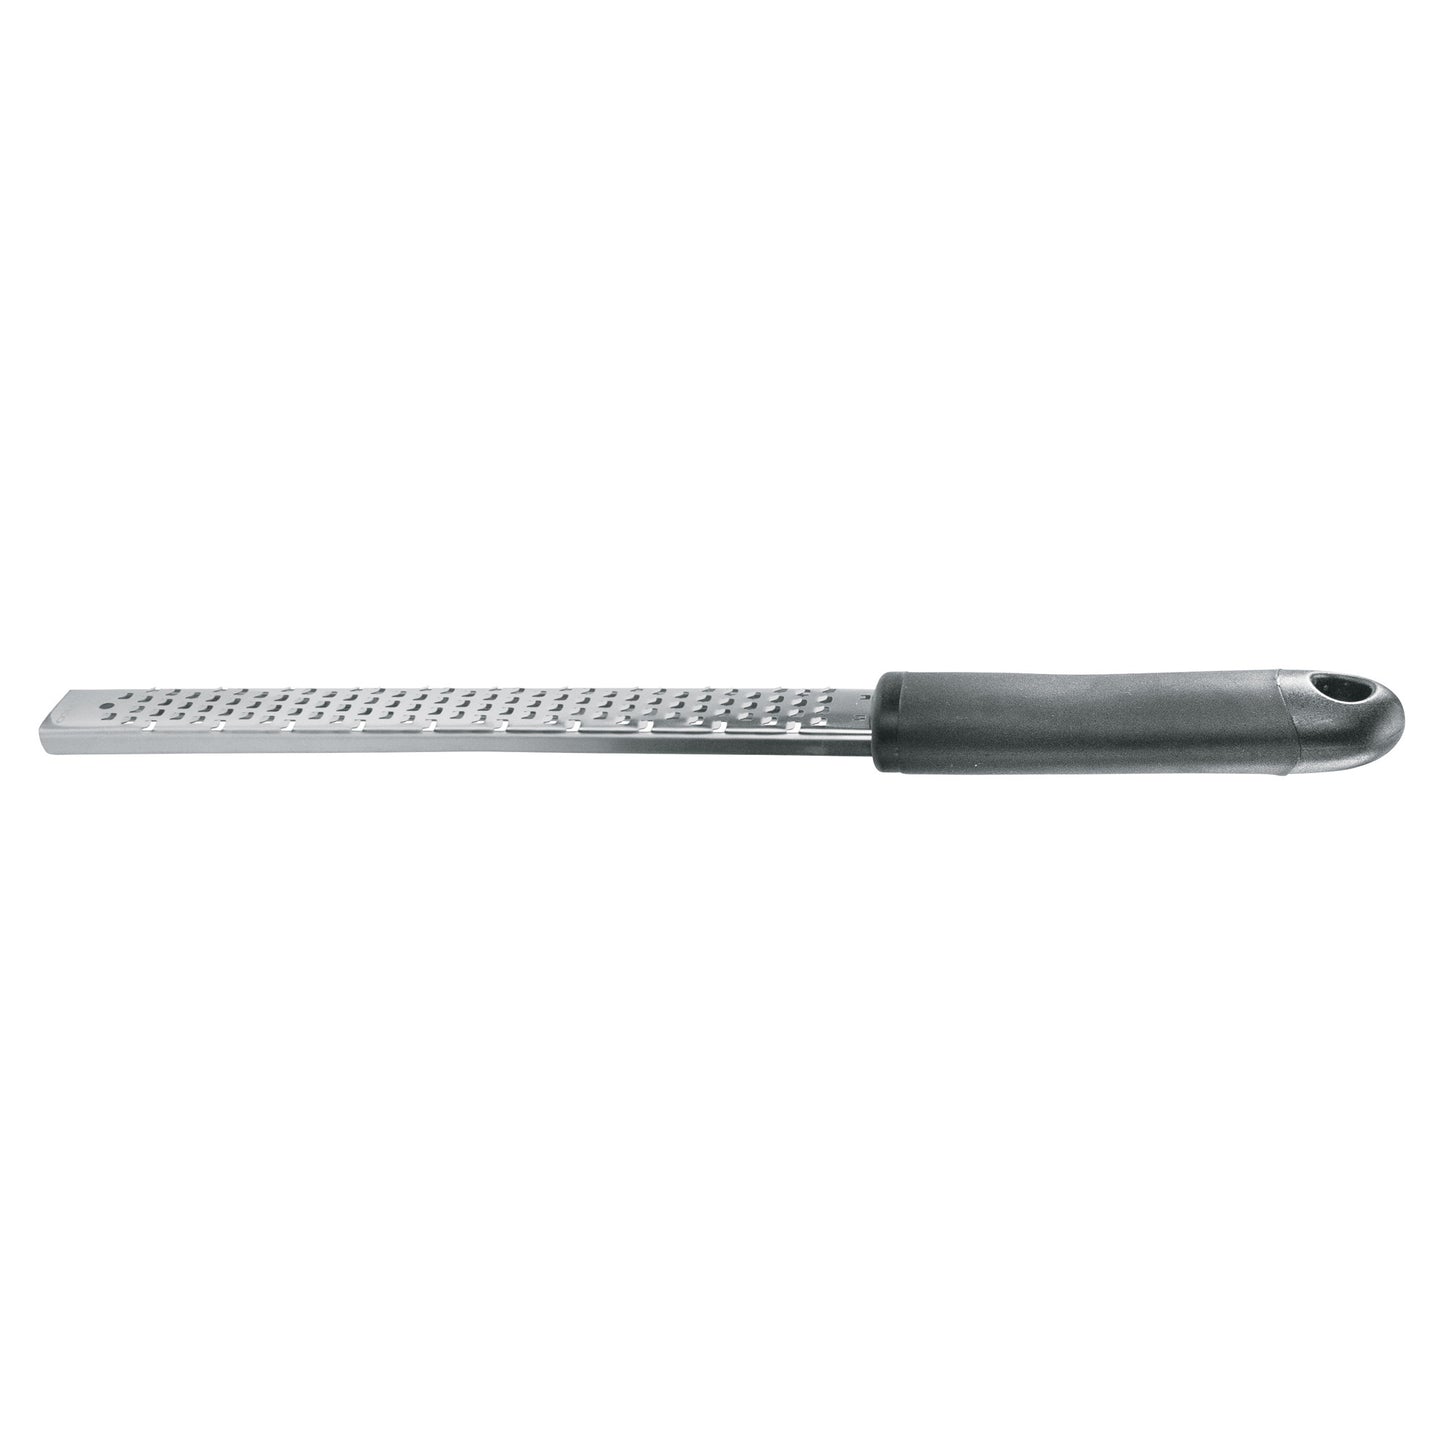 GT-104 - Grater with Soft Grip Handle - Zester